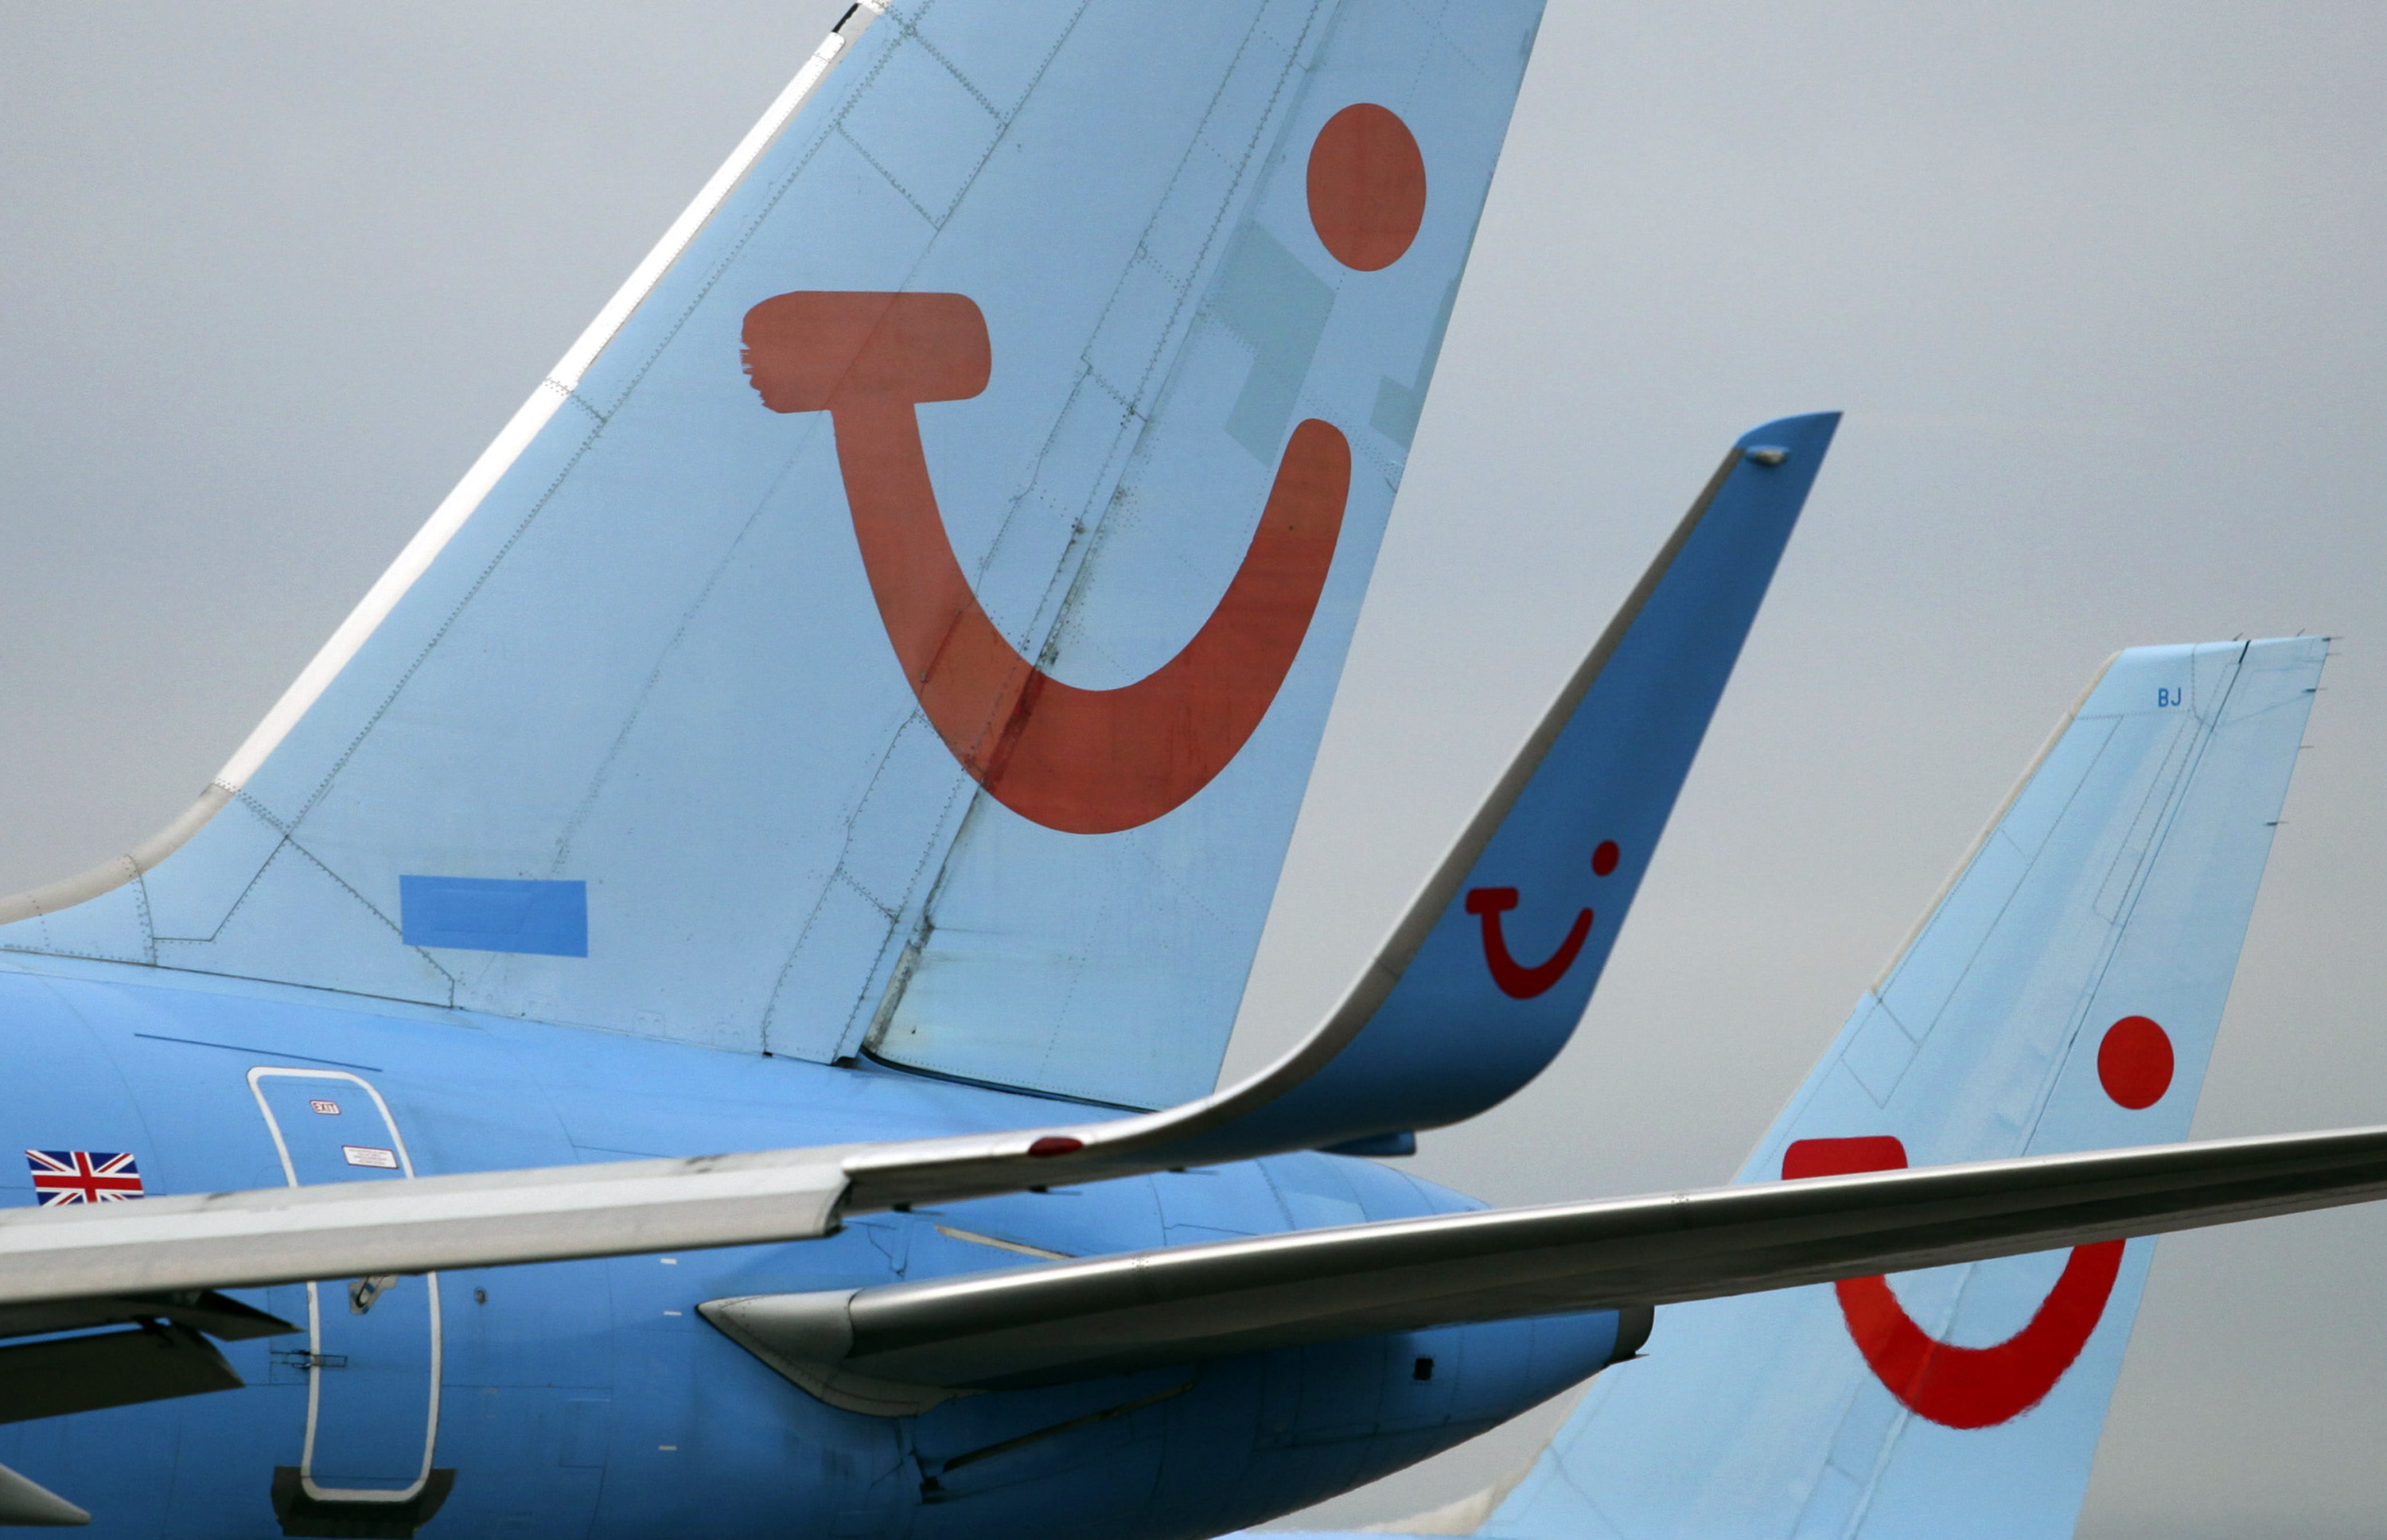 Tui company branding is seen on the taifins of&nbsp;aircraft at Manchester airport.